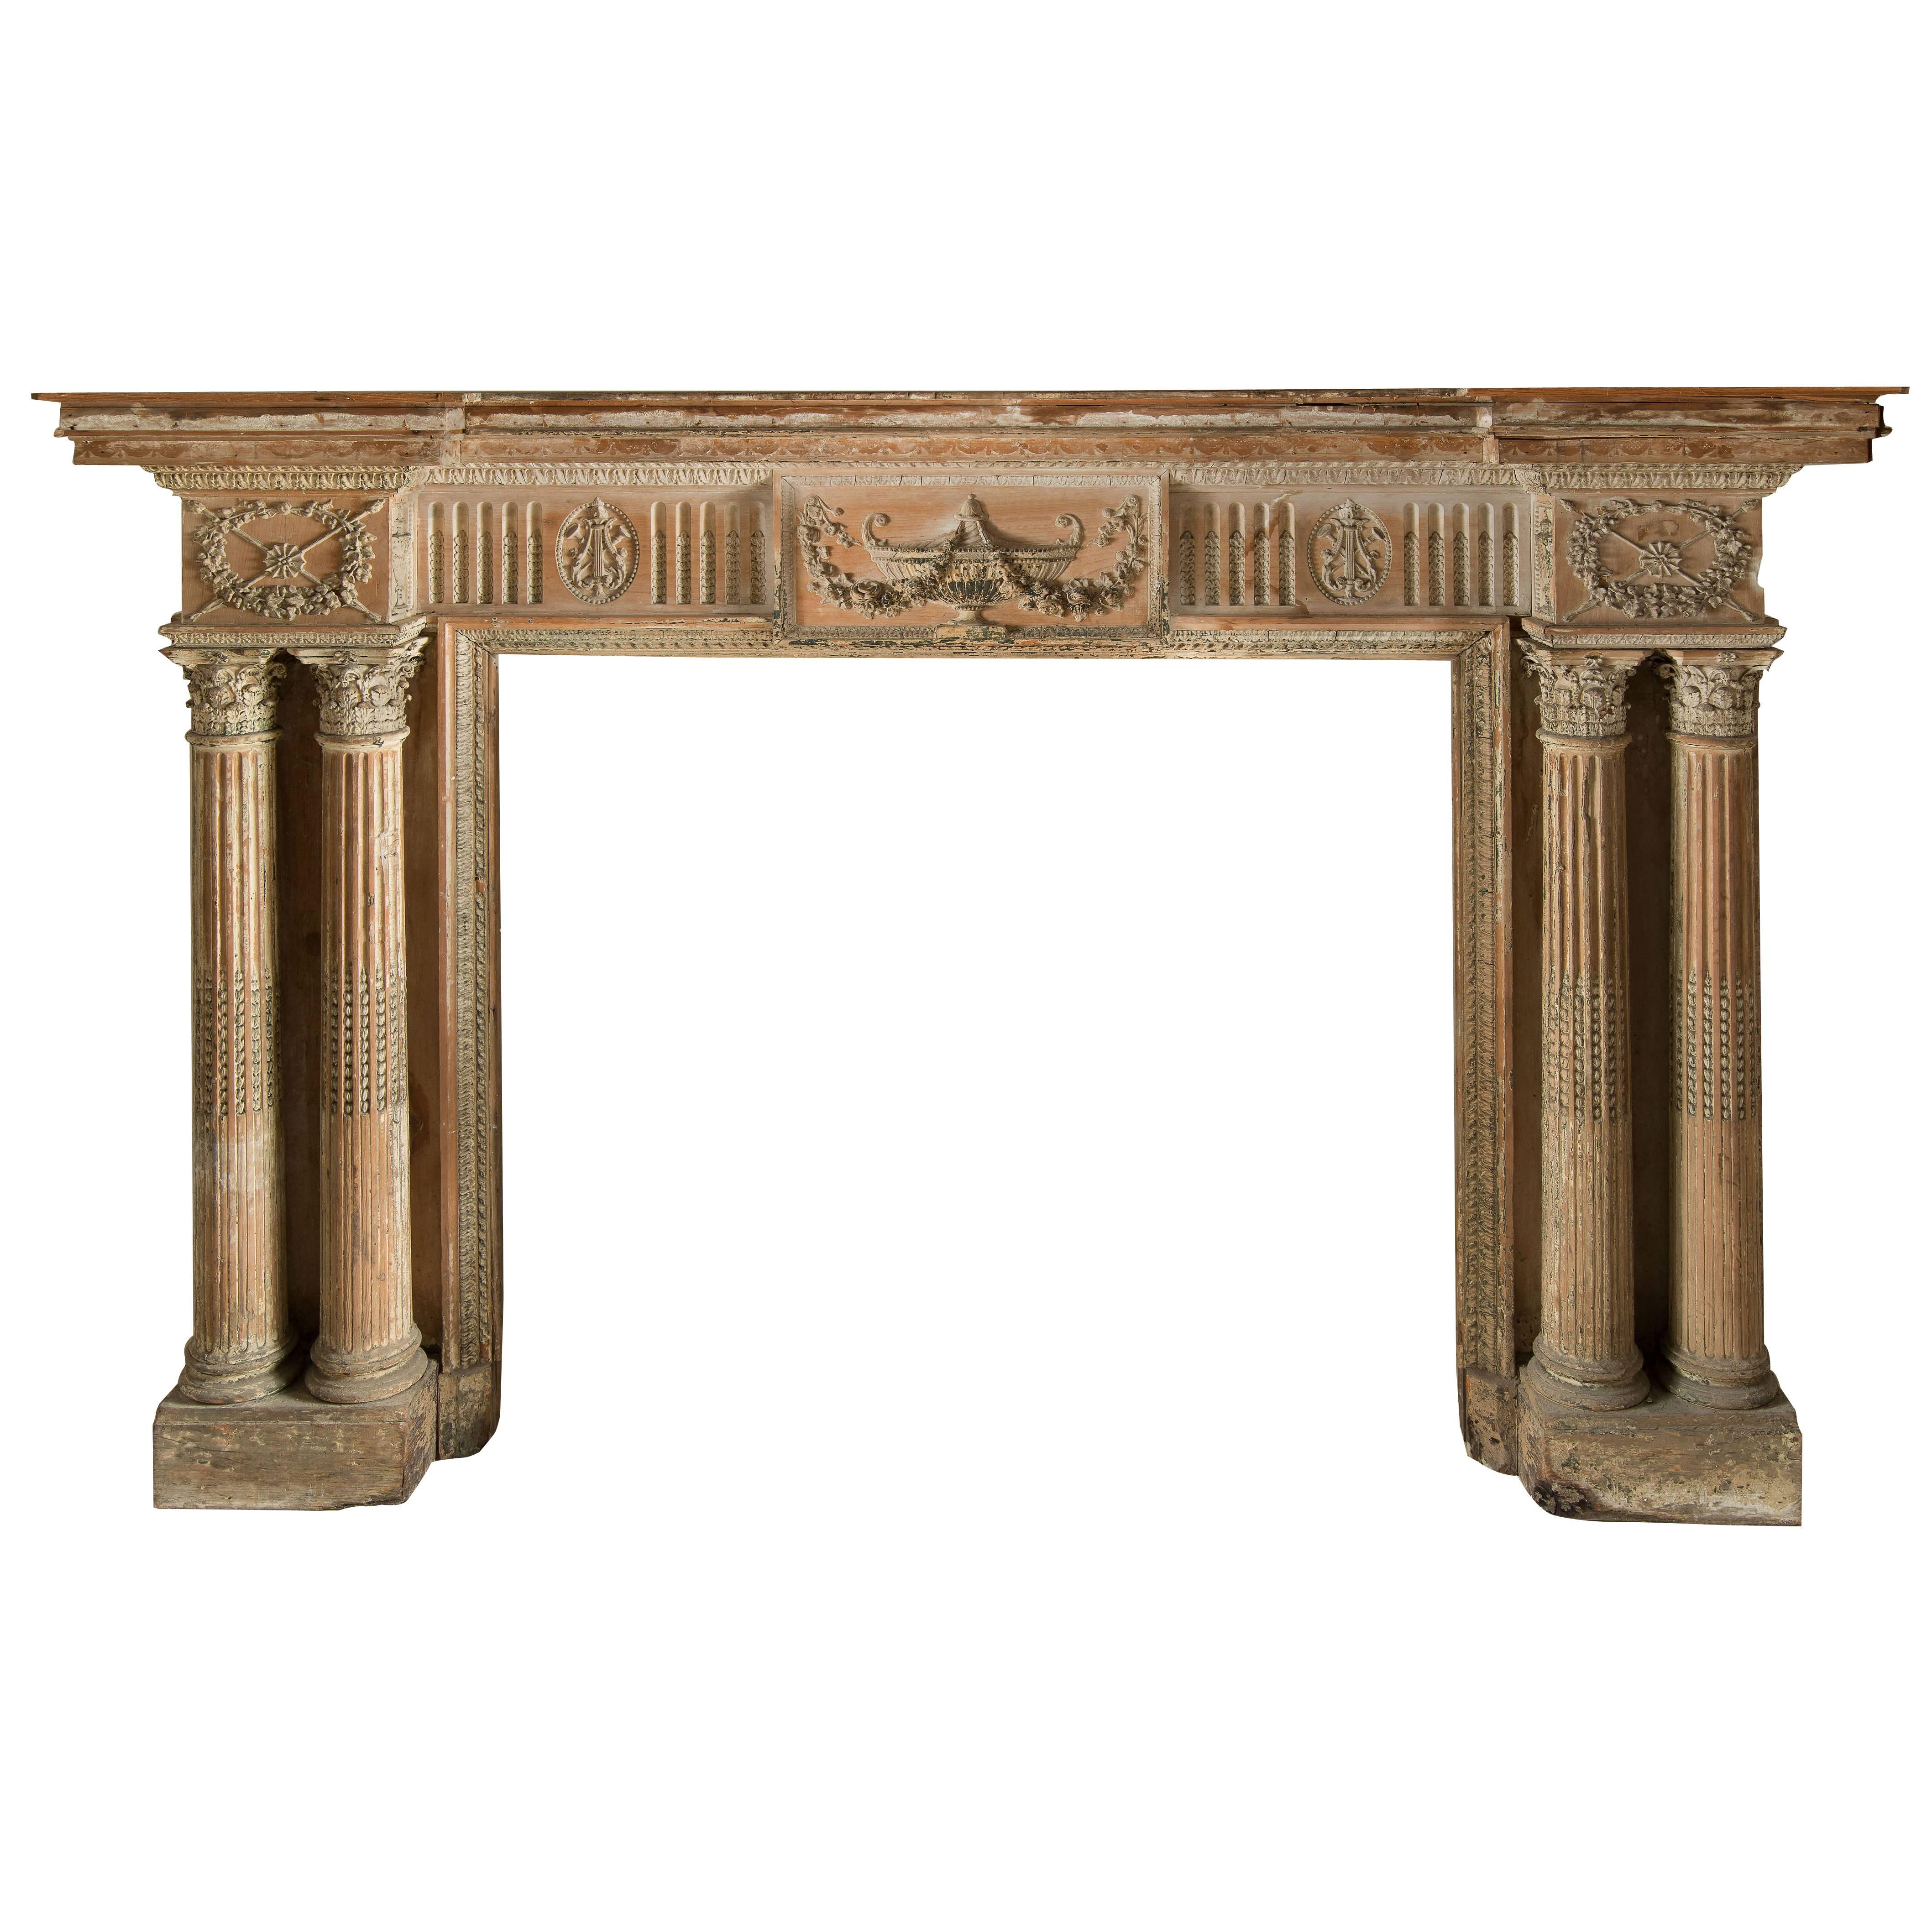 English Fireplace in Wood and Pitch Pin, Late 18th-Early 19th Century For Sale